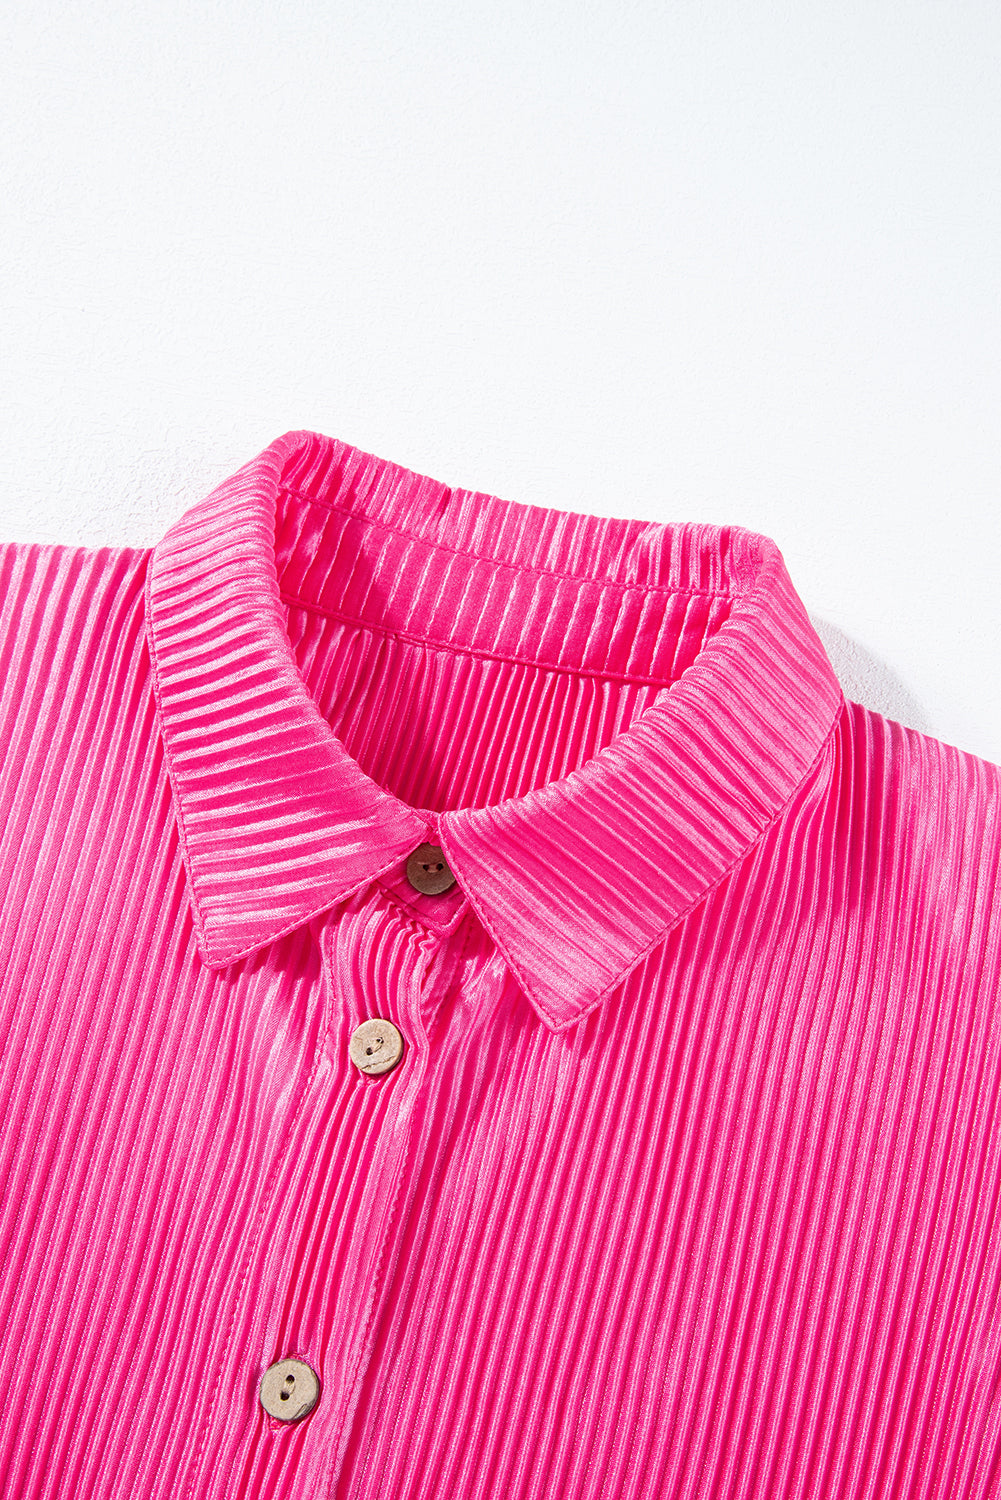 Blue Zone Planet |  Bright Pink Satin Pleated Short Sleeve Shirt Blue Zone Planet